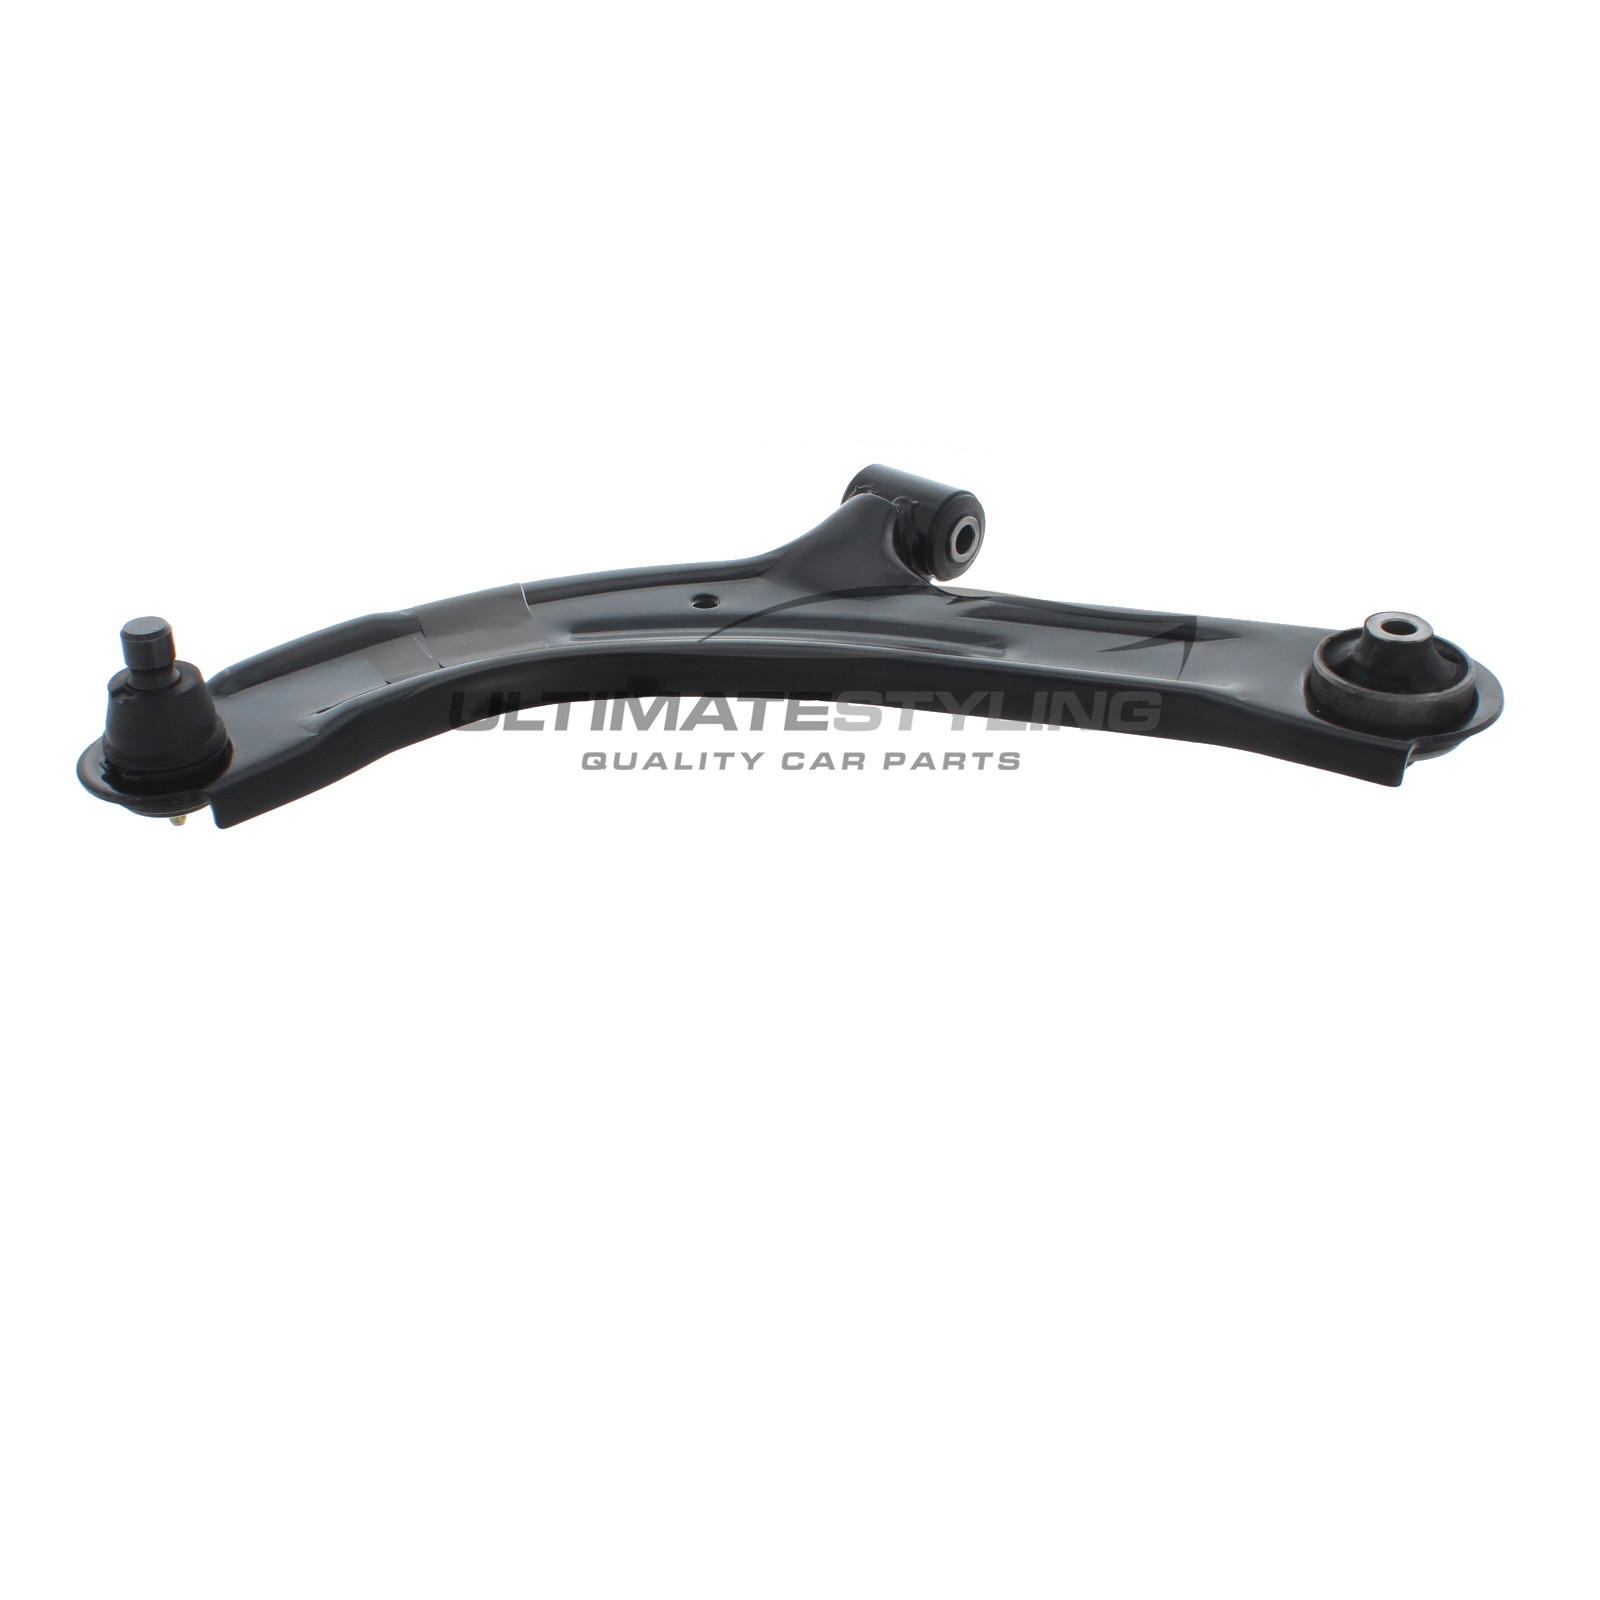 Nissan Cube 2009-2011, Nissan NV200 2009-3000 Front Lower Suspension Arm (Steel) Including Ball Joint and Rear Bush Passenger Side (LH)